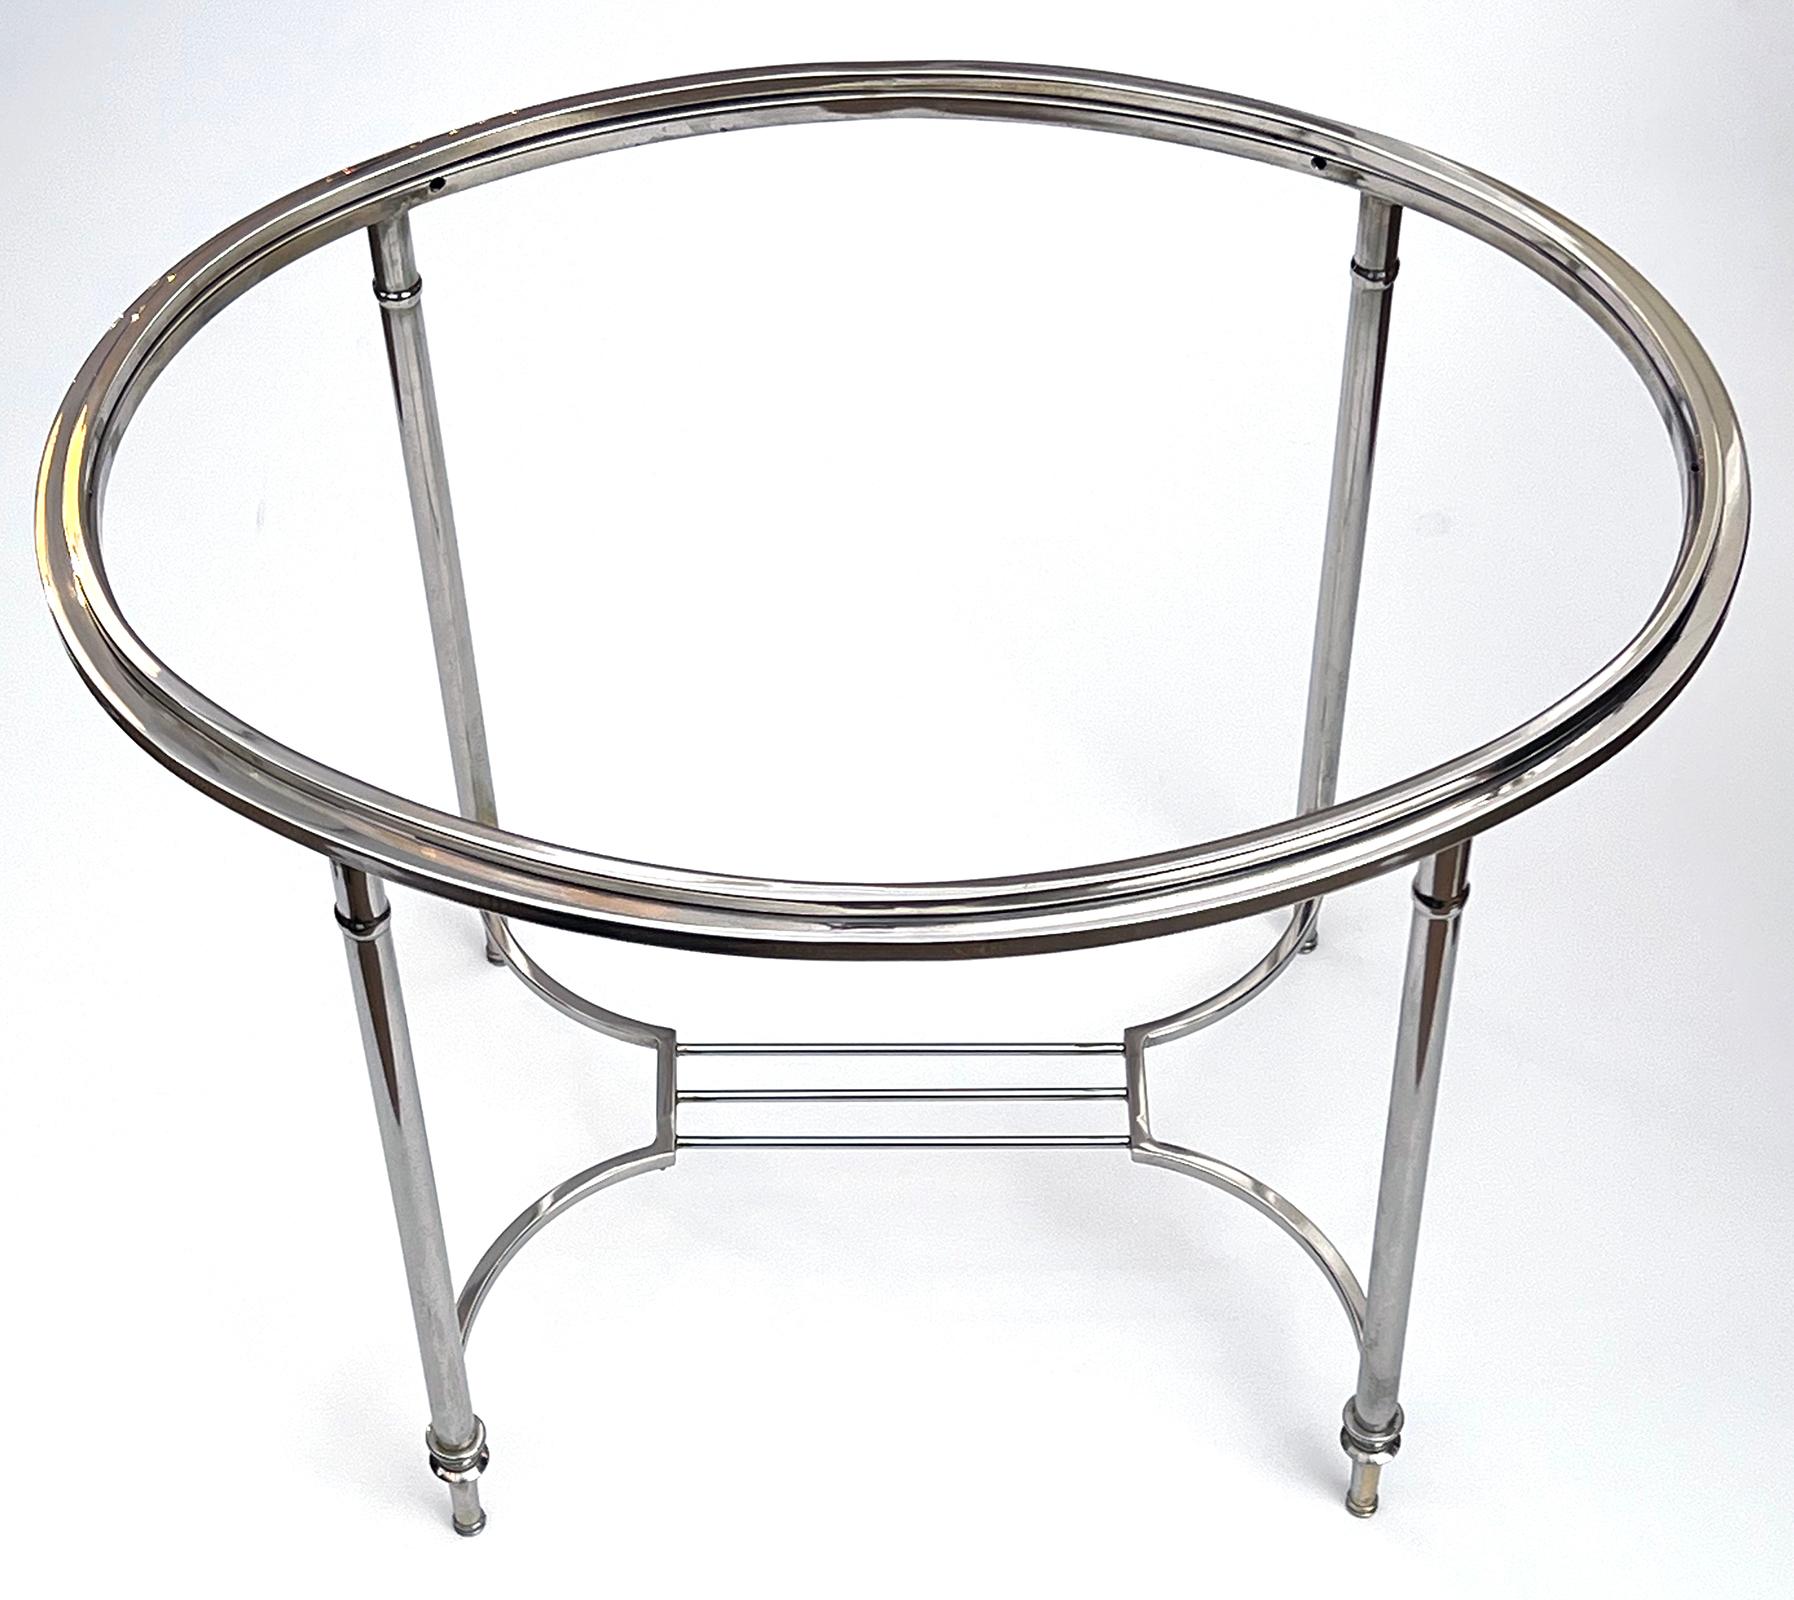 French Art Deco Nickel-plated Oval Side Table in the Style of Maison Jansen For Sale 3